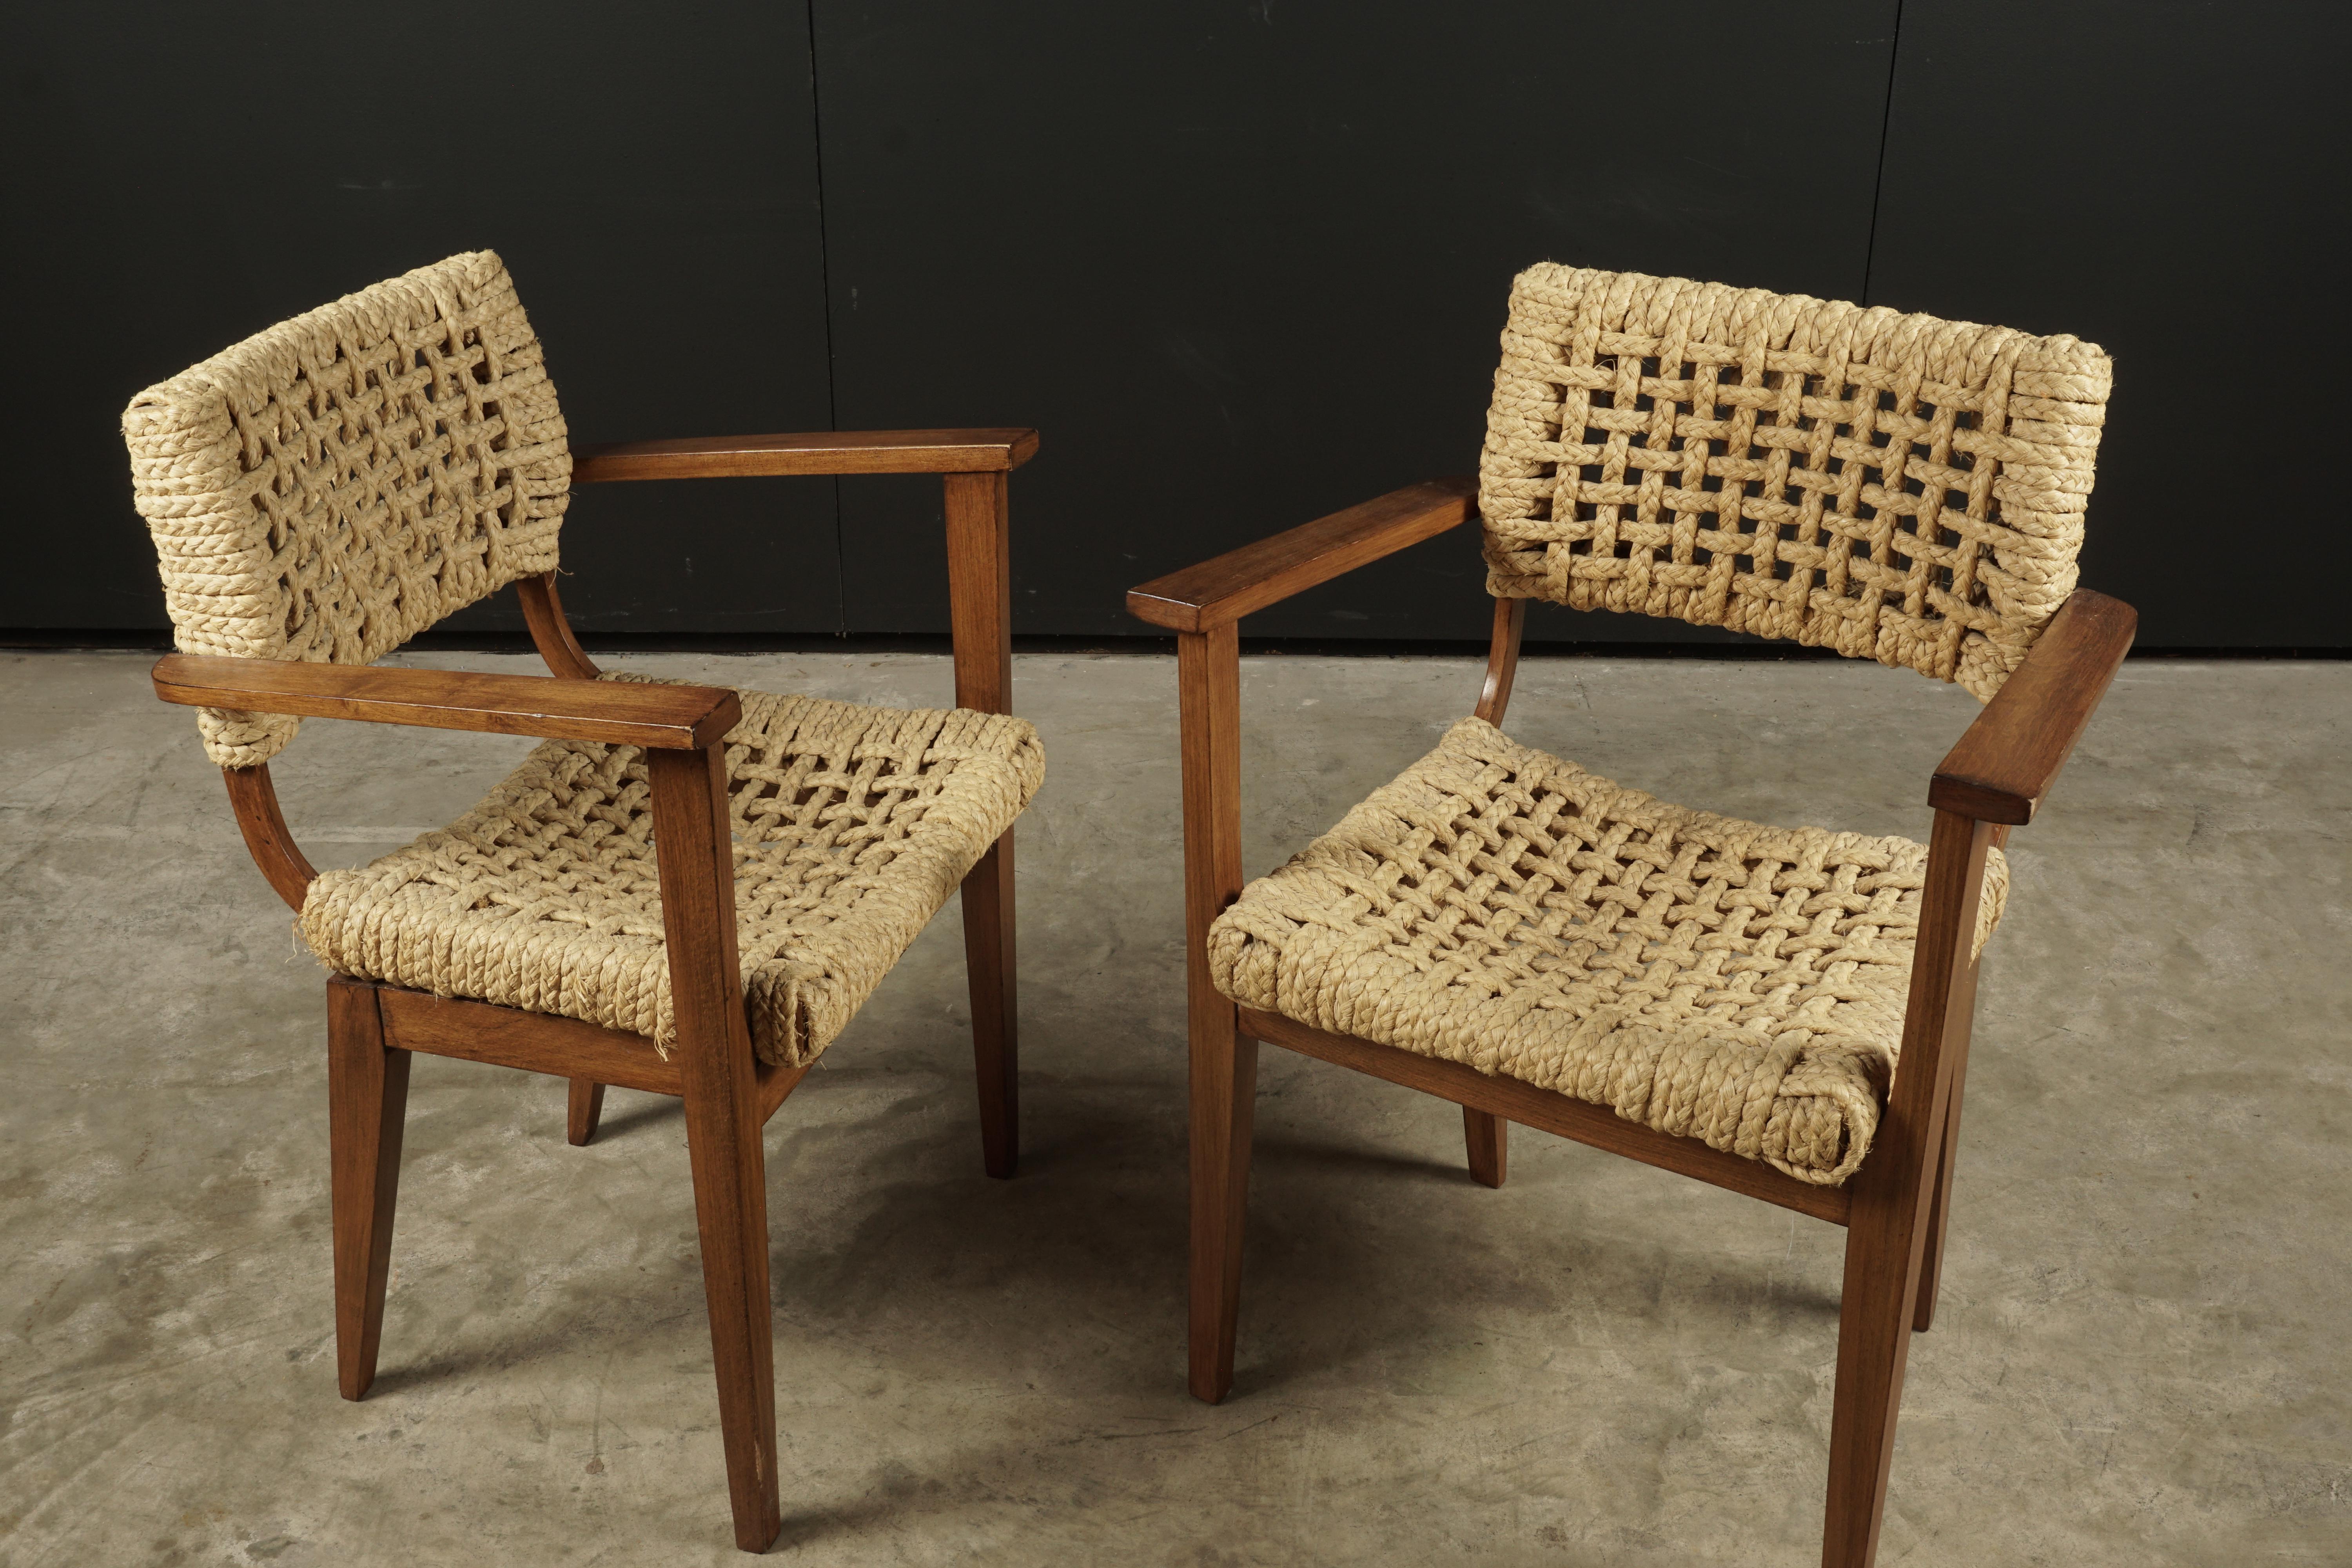 European Vintage Pair of Audoux Minet Armchairs from France, circa 1940